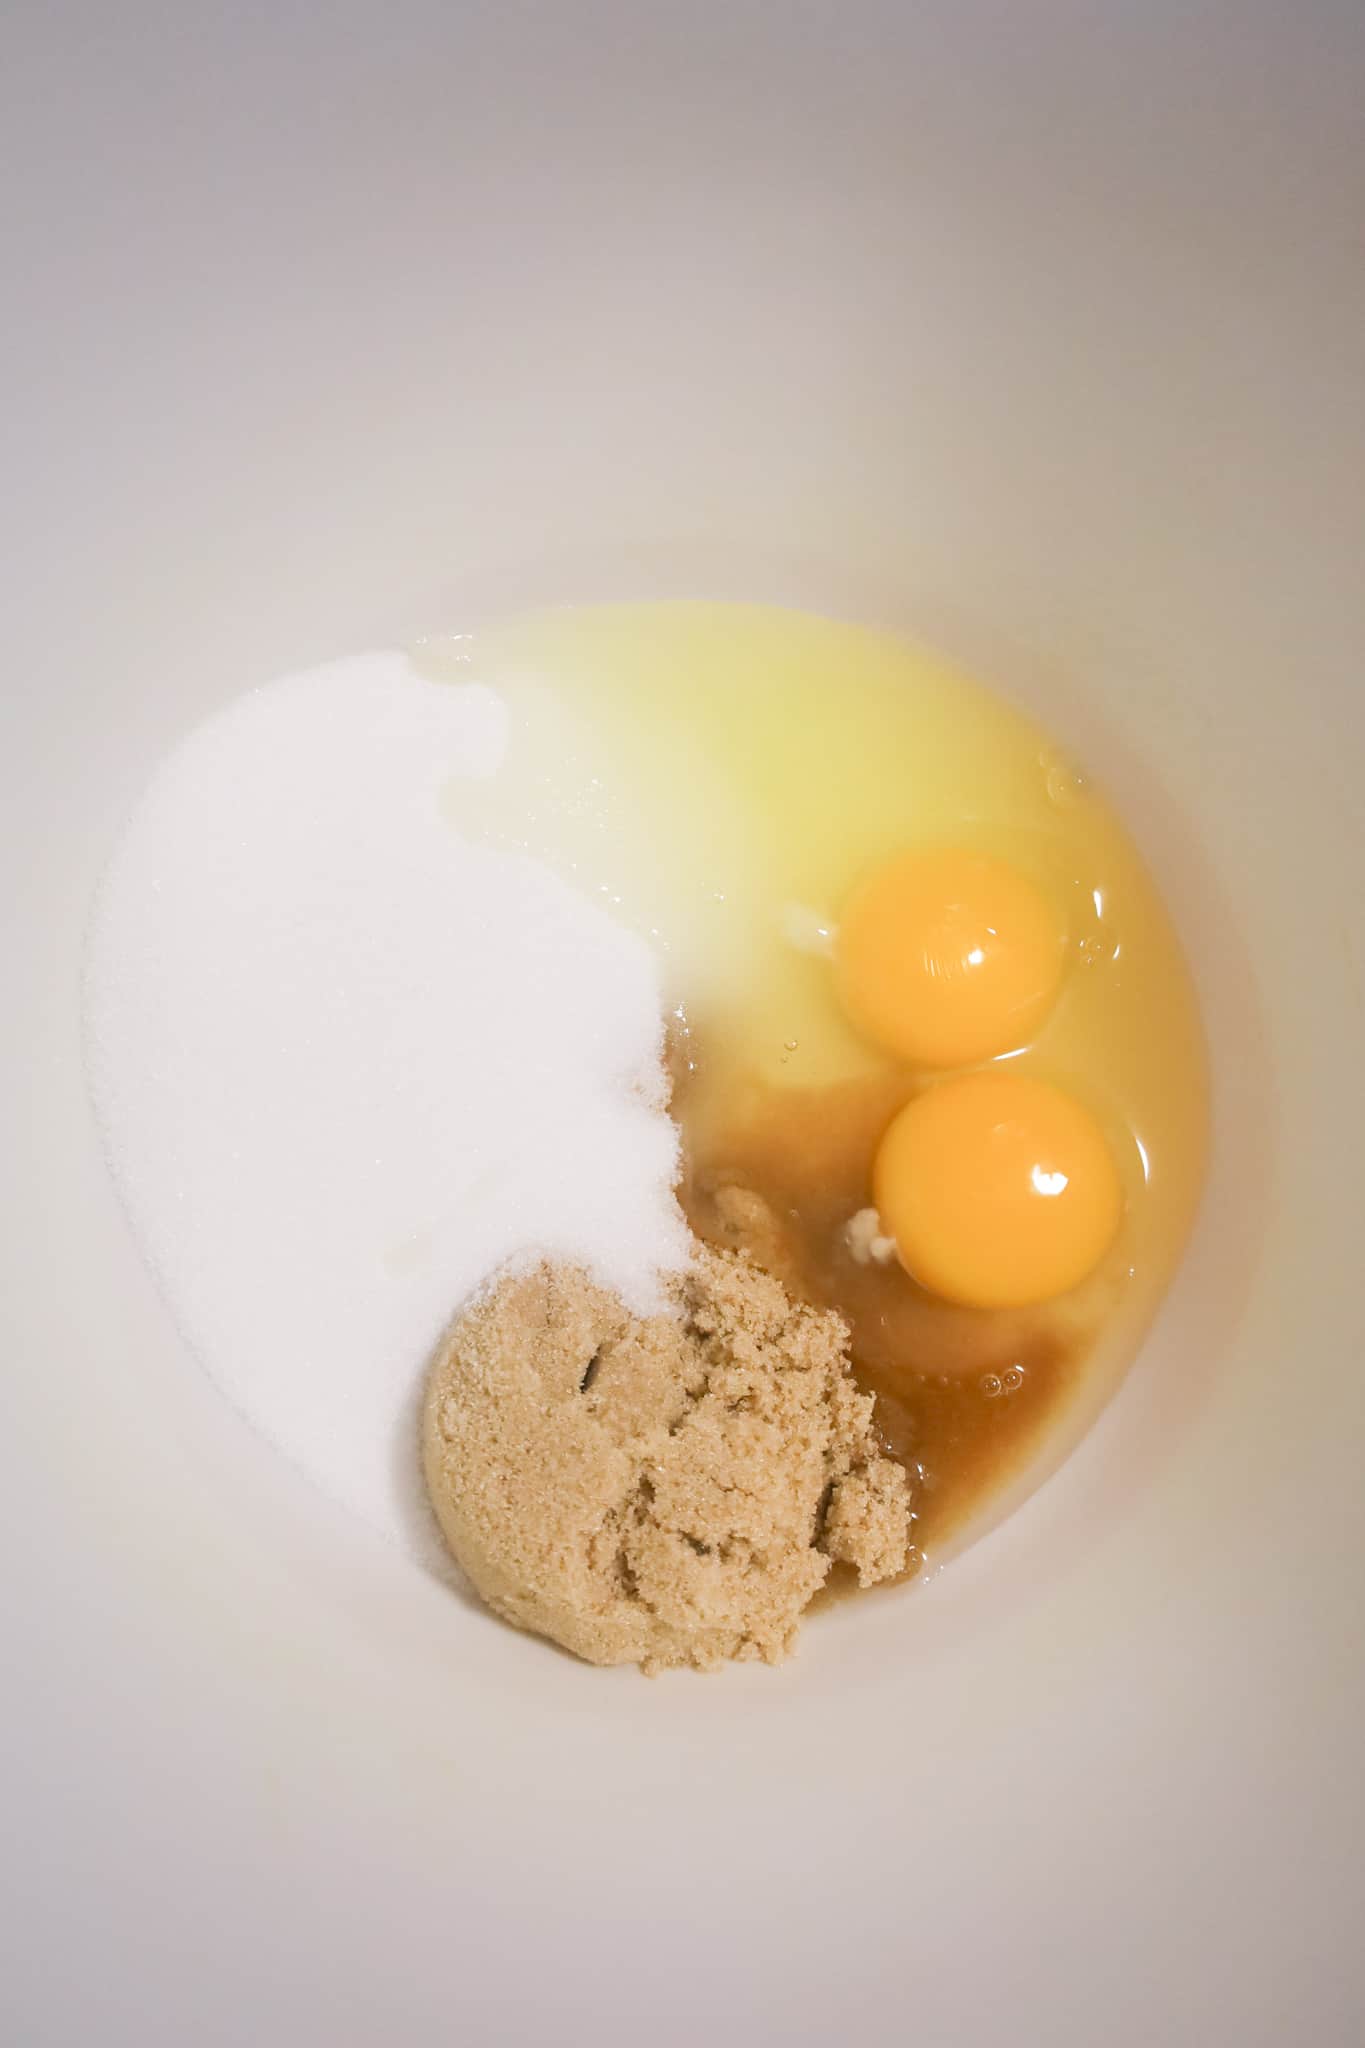 brown sugar, white sugar, vanilla extract and eggs in a mixing bowl